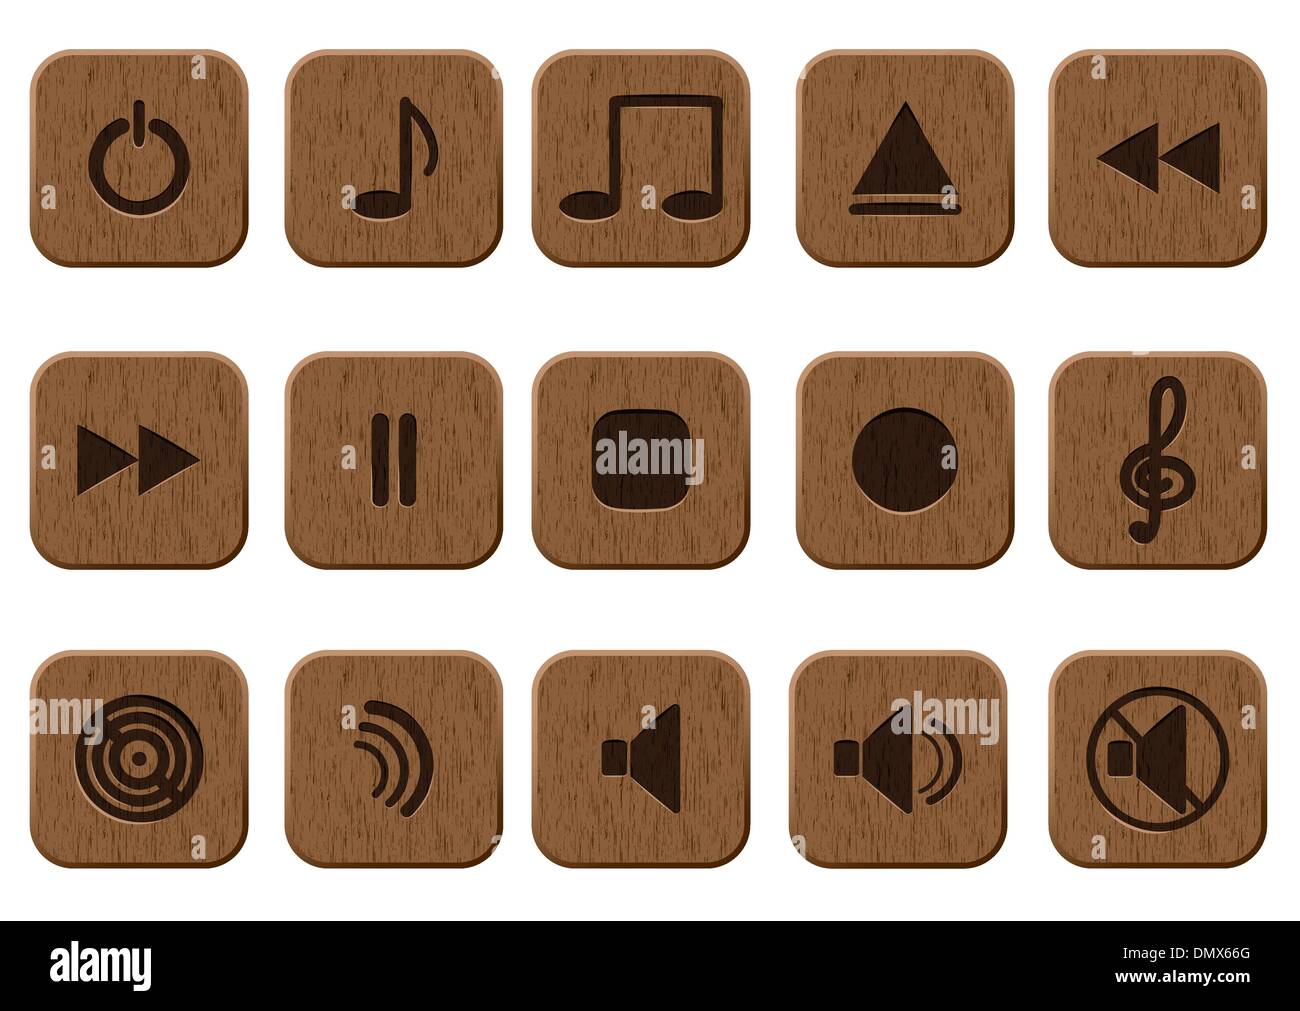 15 music icons set. Stock Vector